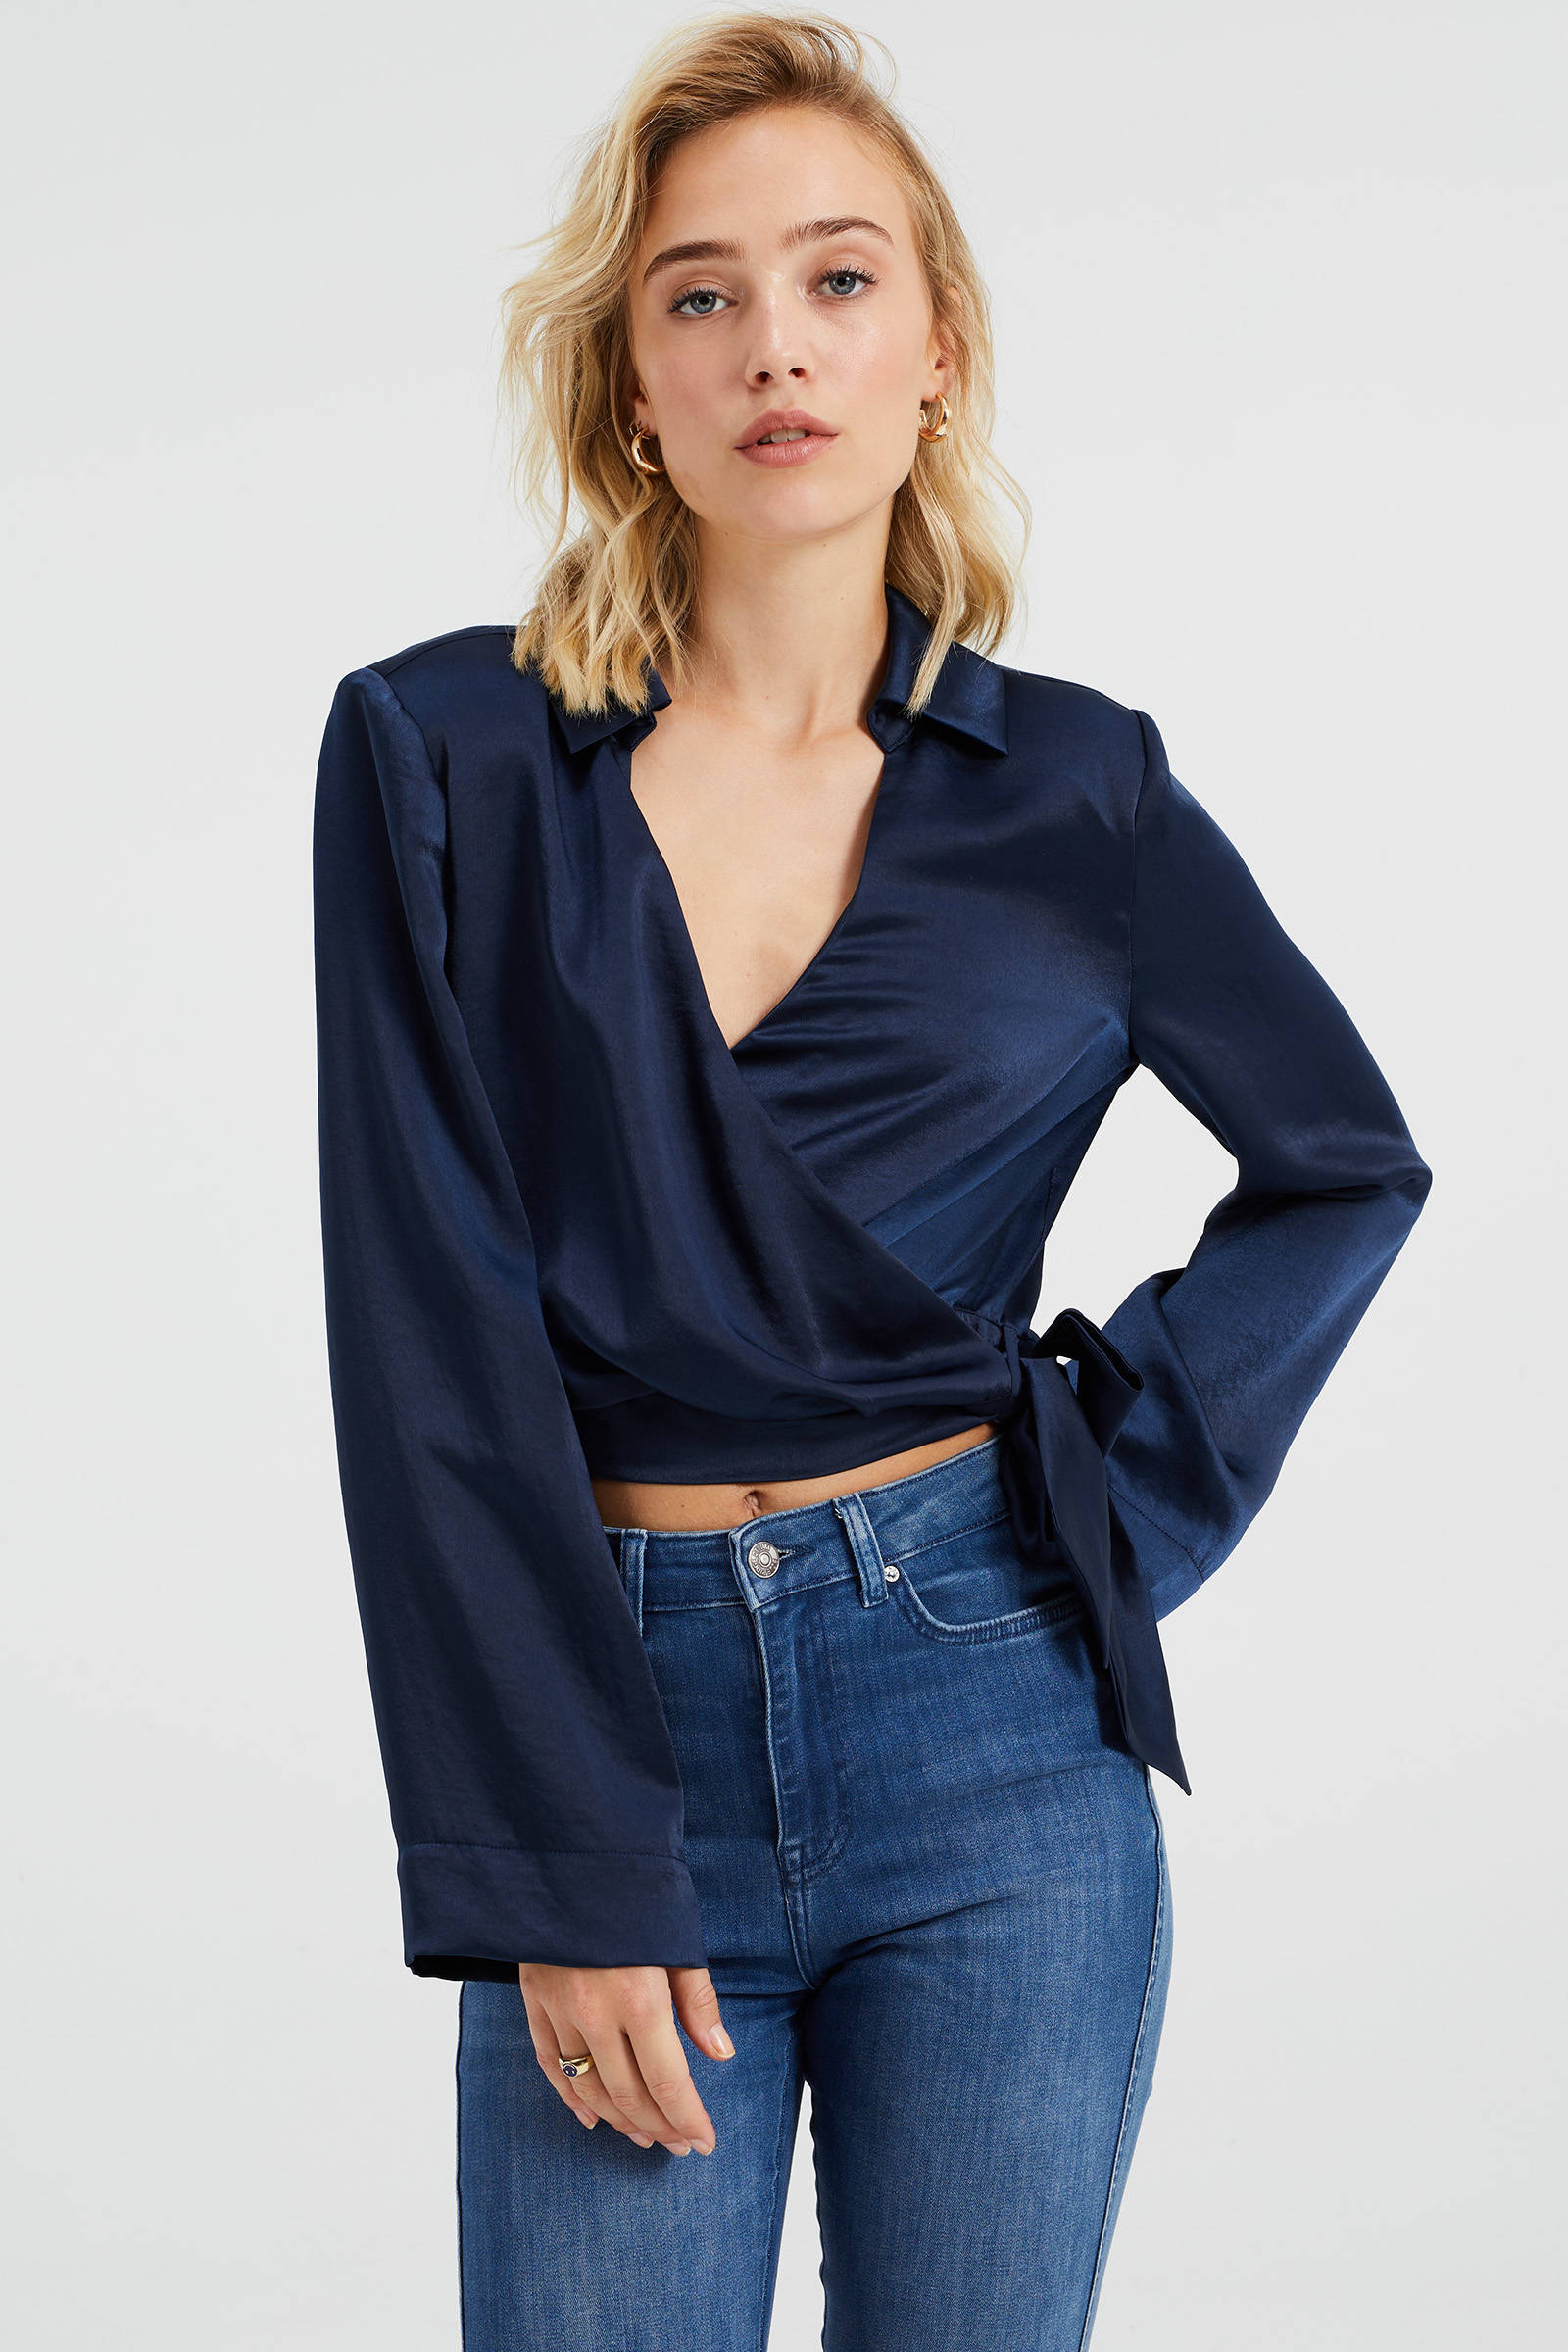 Bailey44 Cropped top wolwit-zwart straat-mode uitstraling Mode Tops Cropped tops 